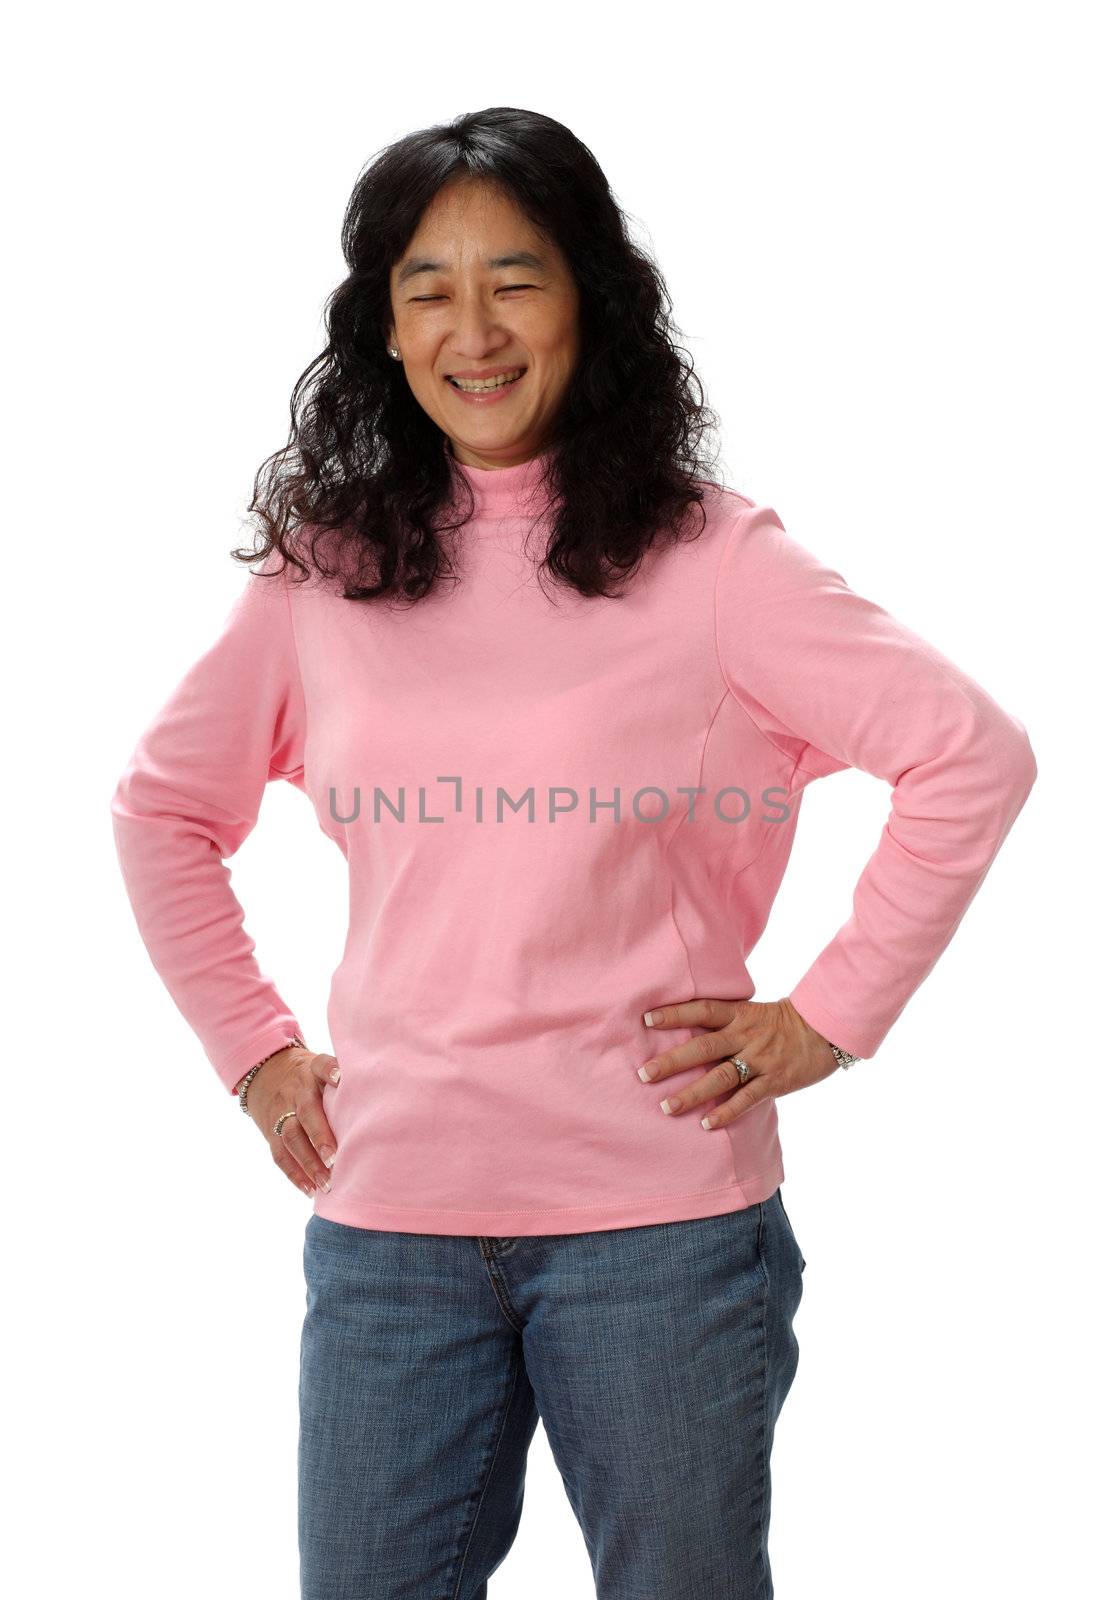 A Mature Asian Lady Laughs Joyfully with her Eyes Closed   by libyphoto